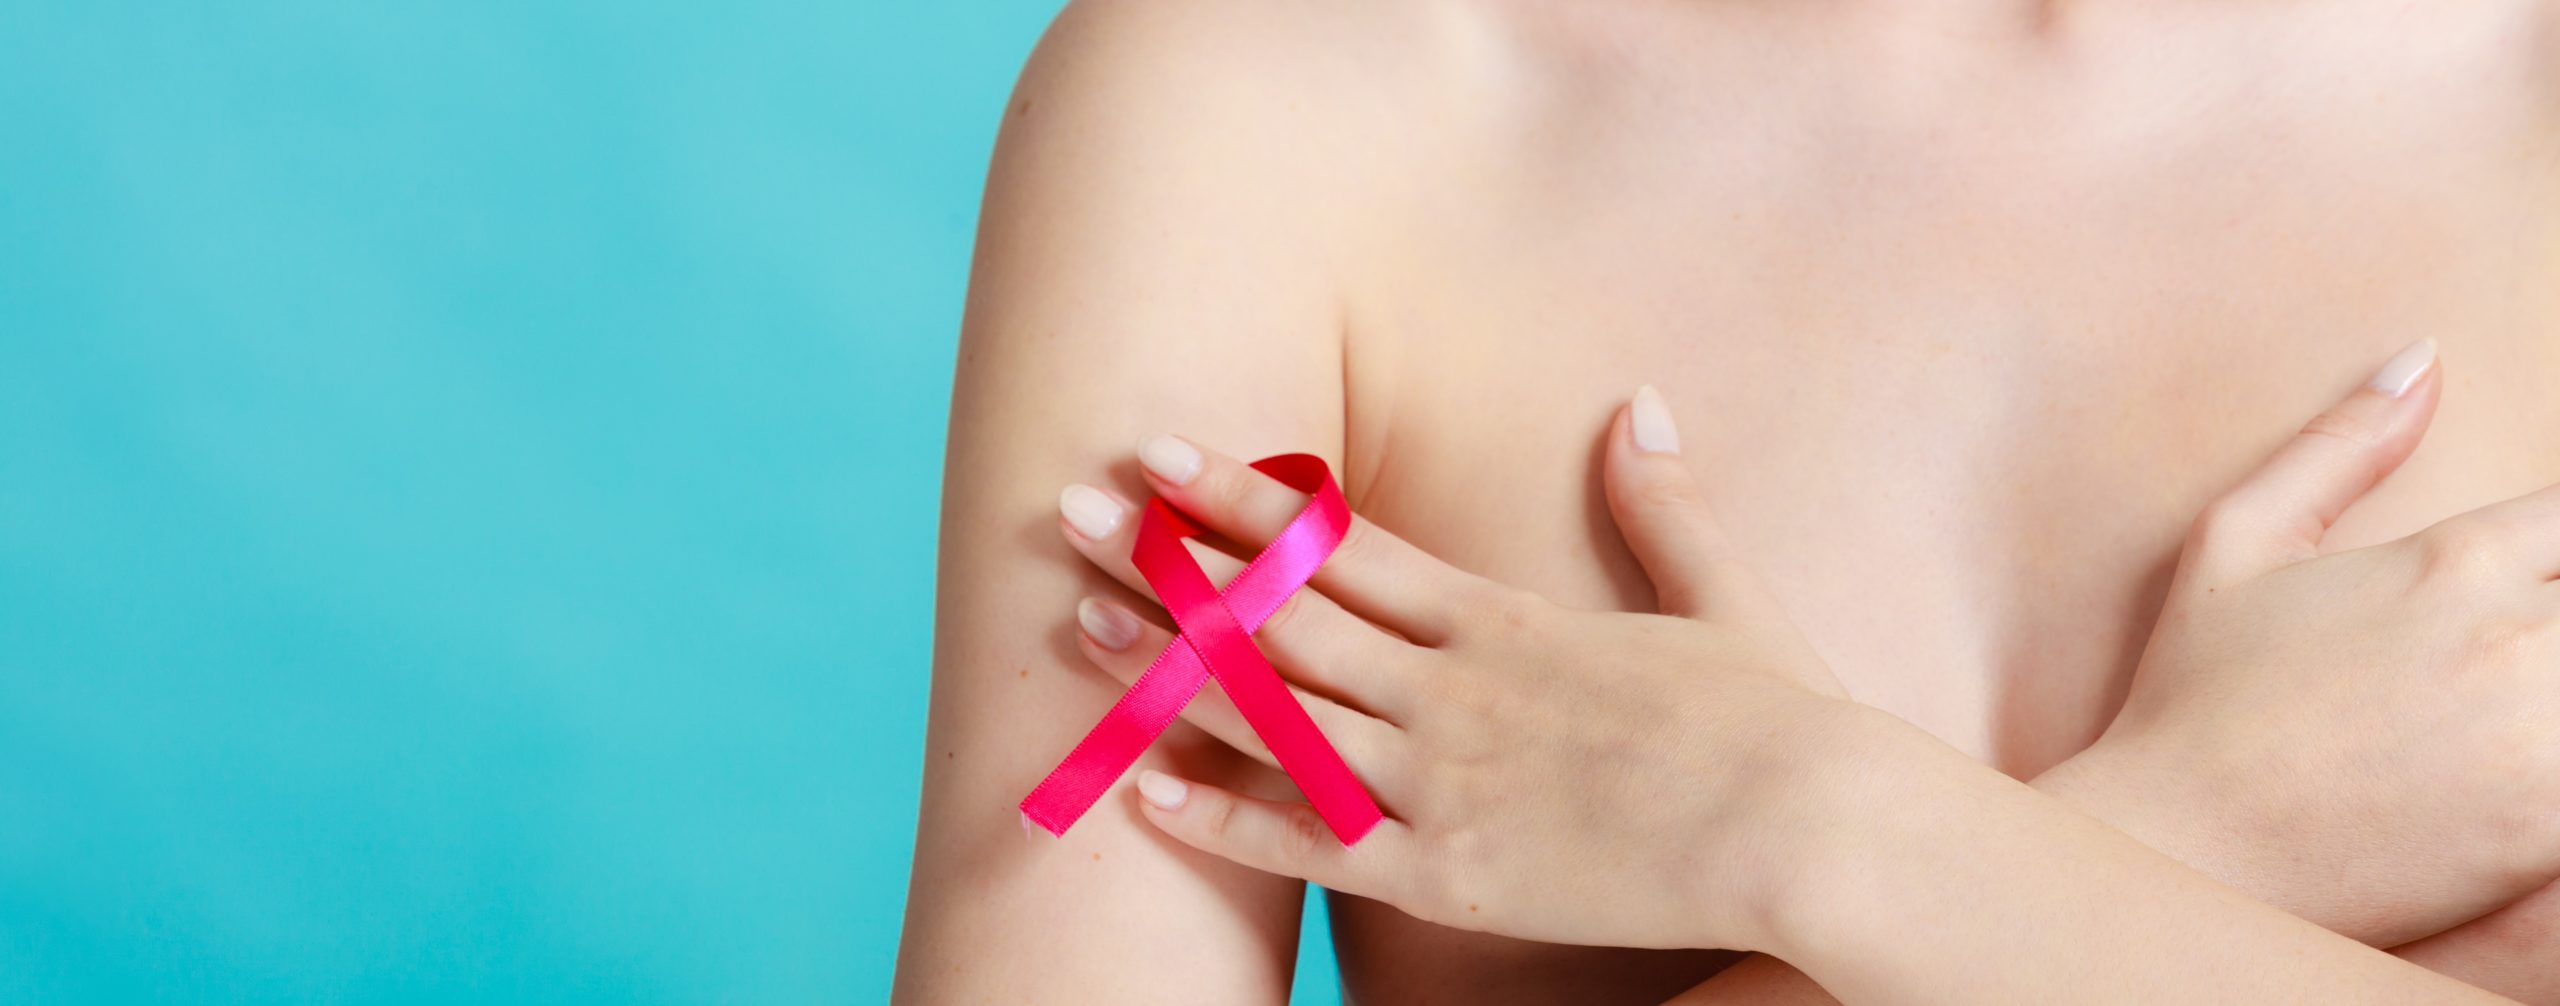 How to do a Breast Self-Exam (BSE)